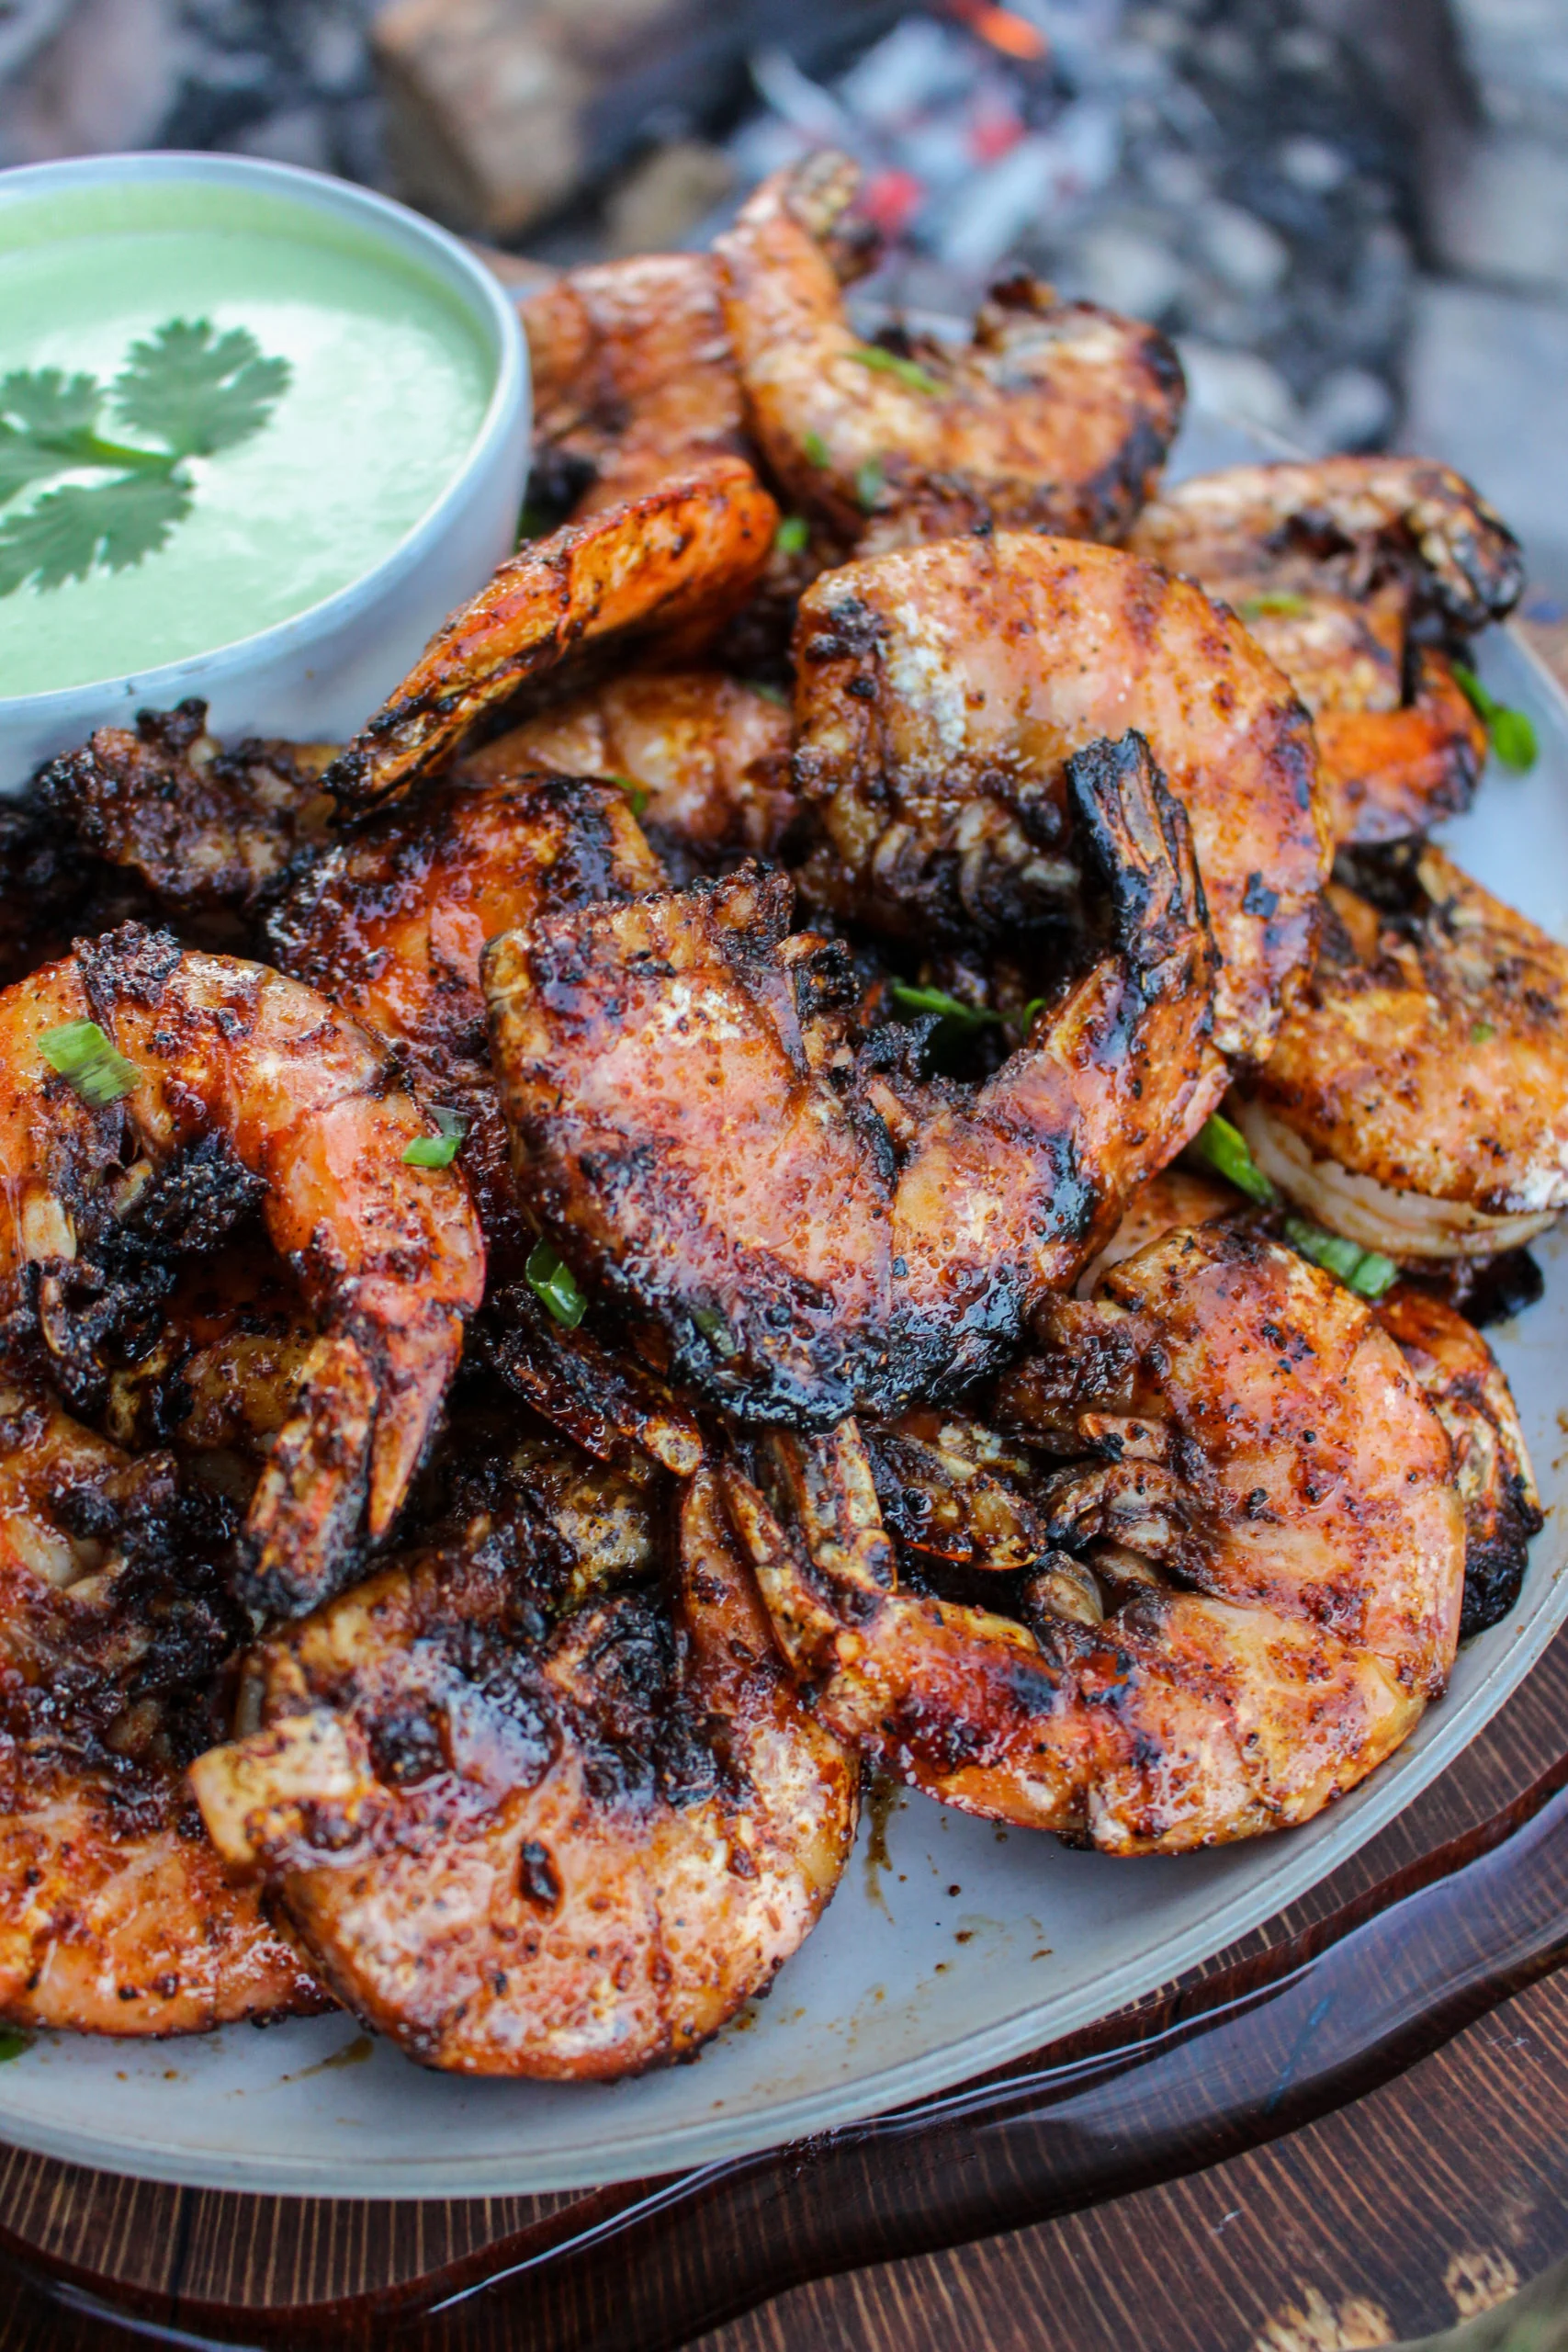 Grilled shrimp piled on a plate and ready to serve.